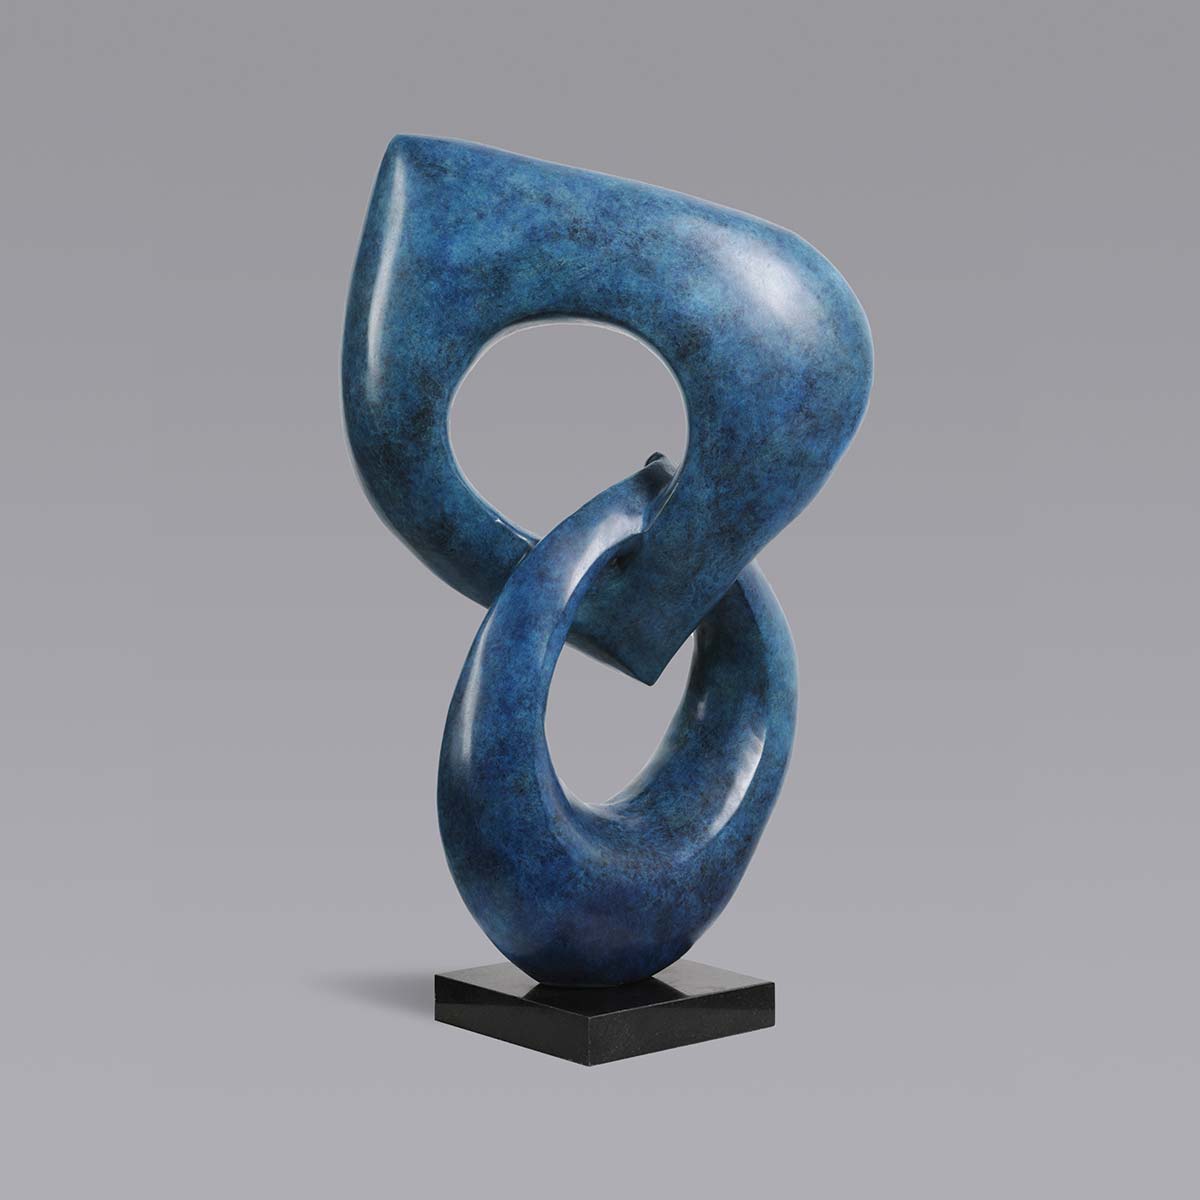 Two rings 03, blue patina bronze sculpture - Fp Art Collection - Fp Art  Online